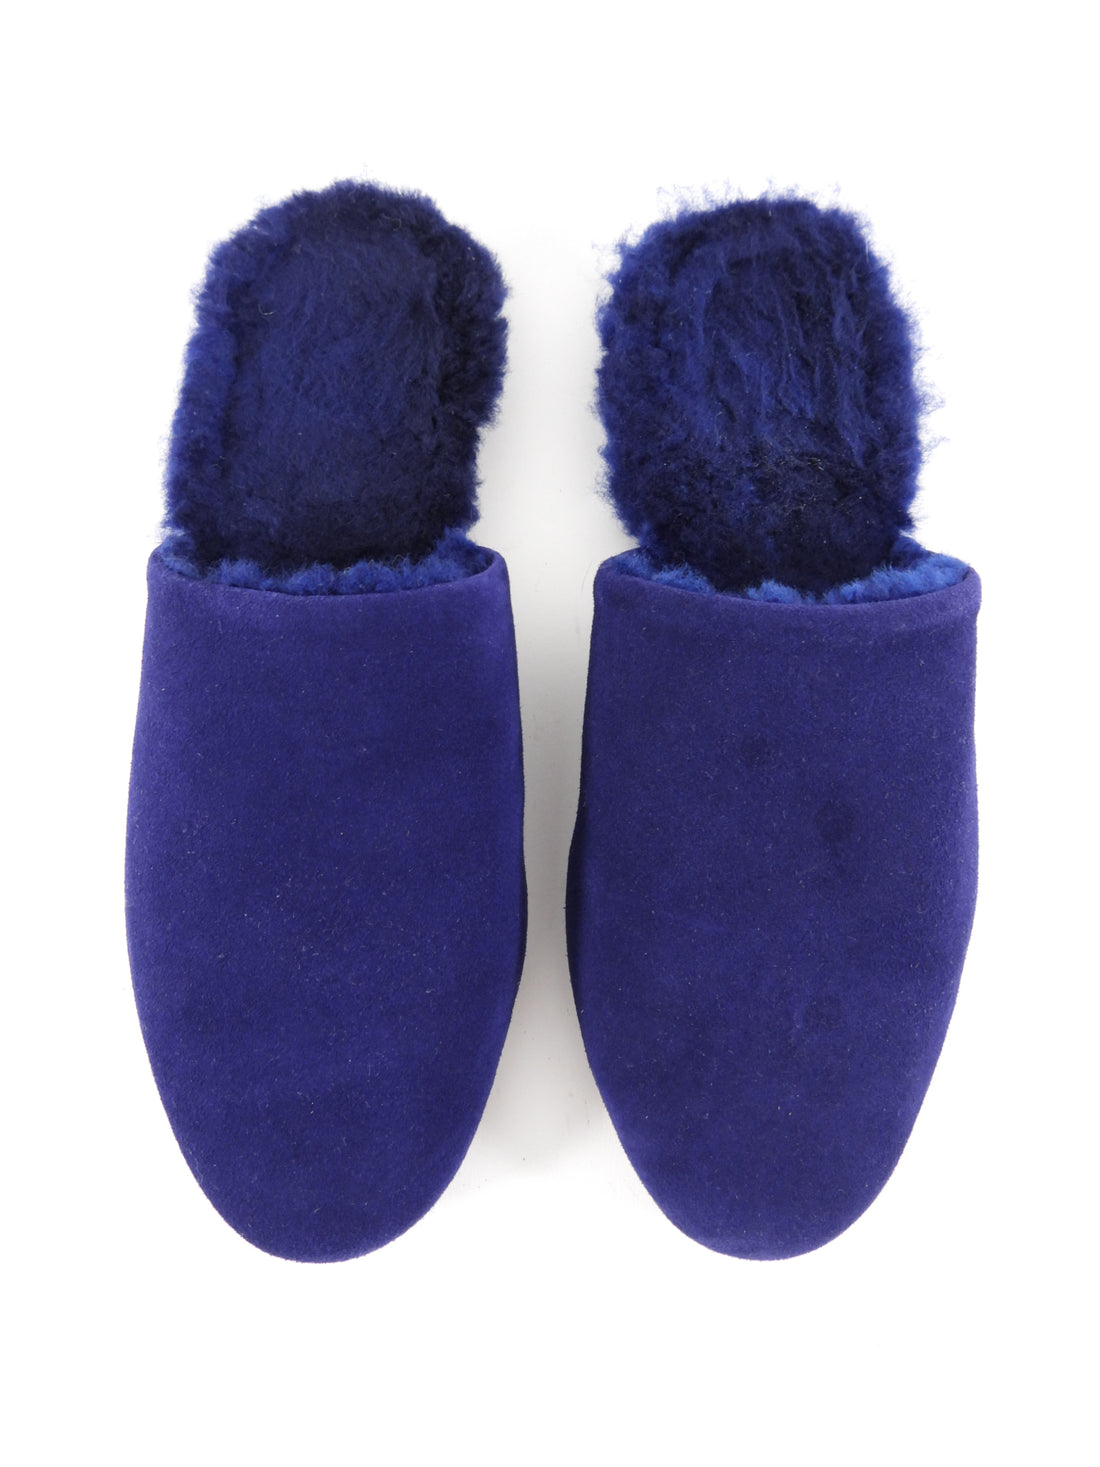 Tkees Ines Shearling Flat Slipper in Navy - USA 7